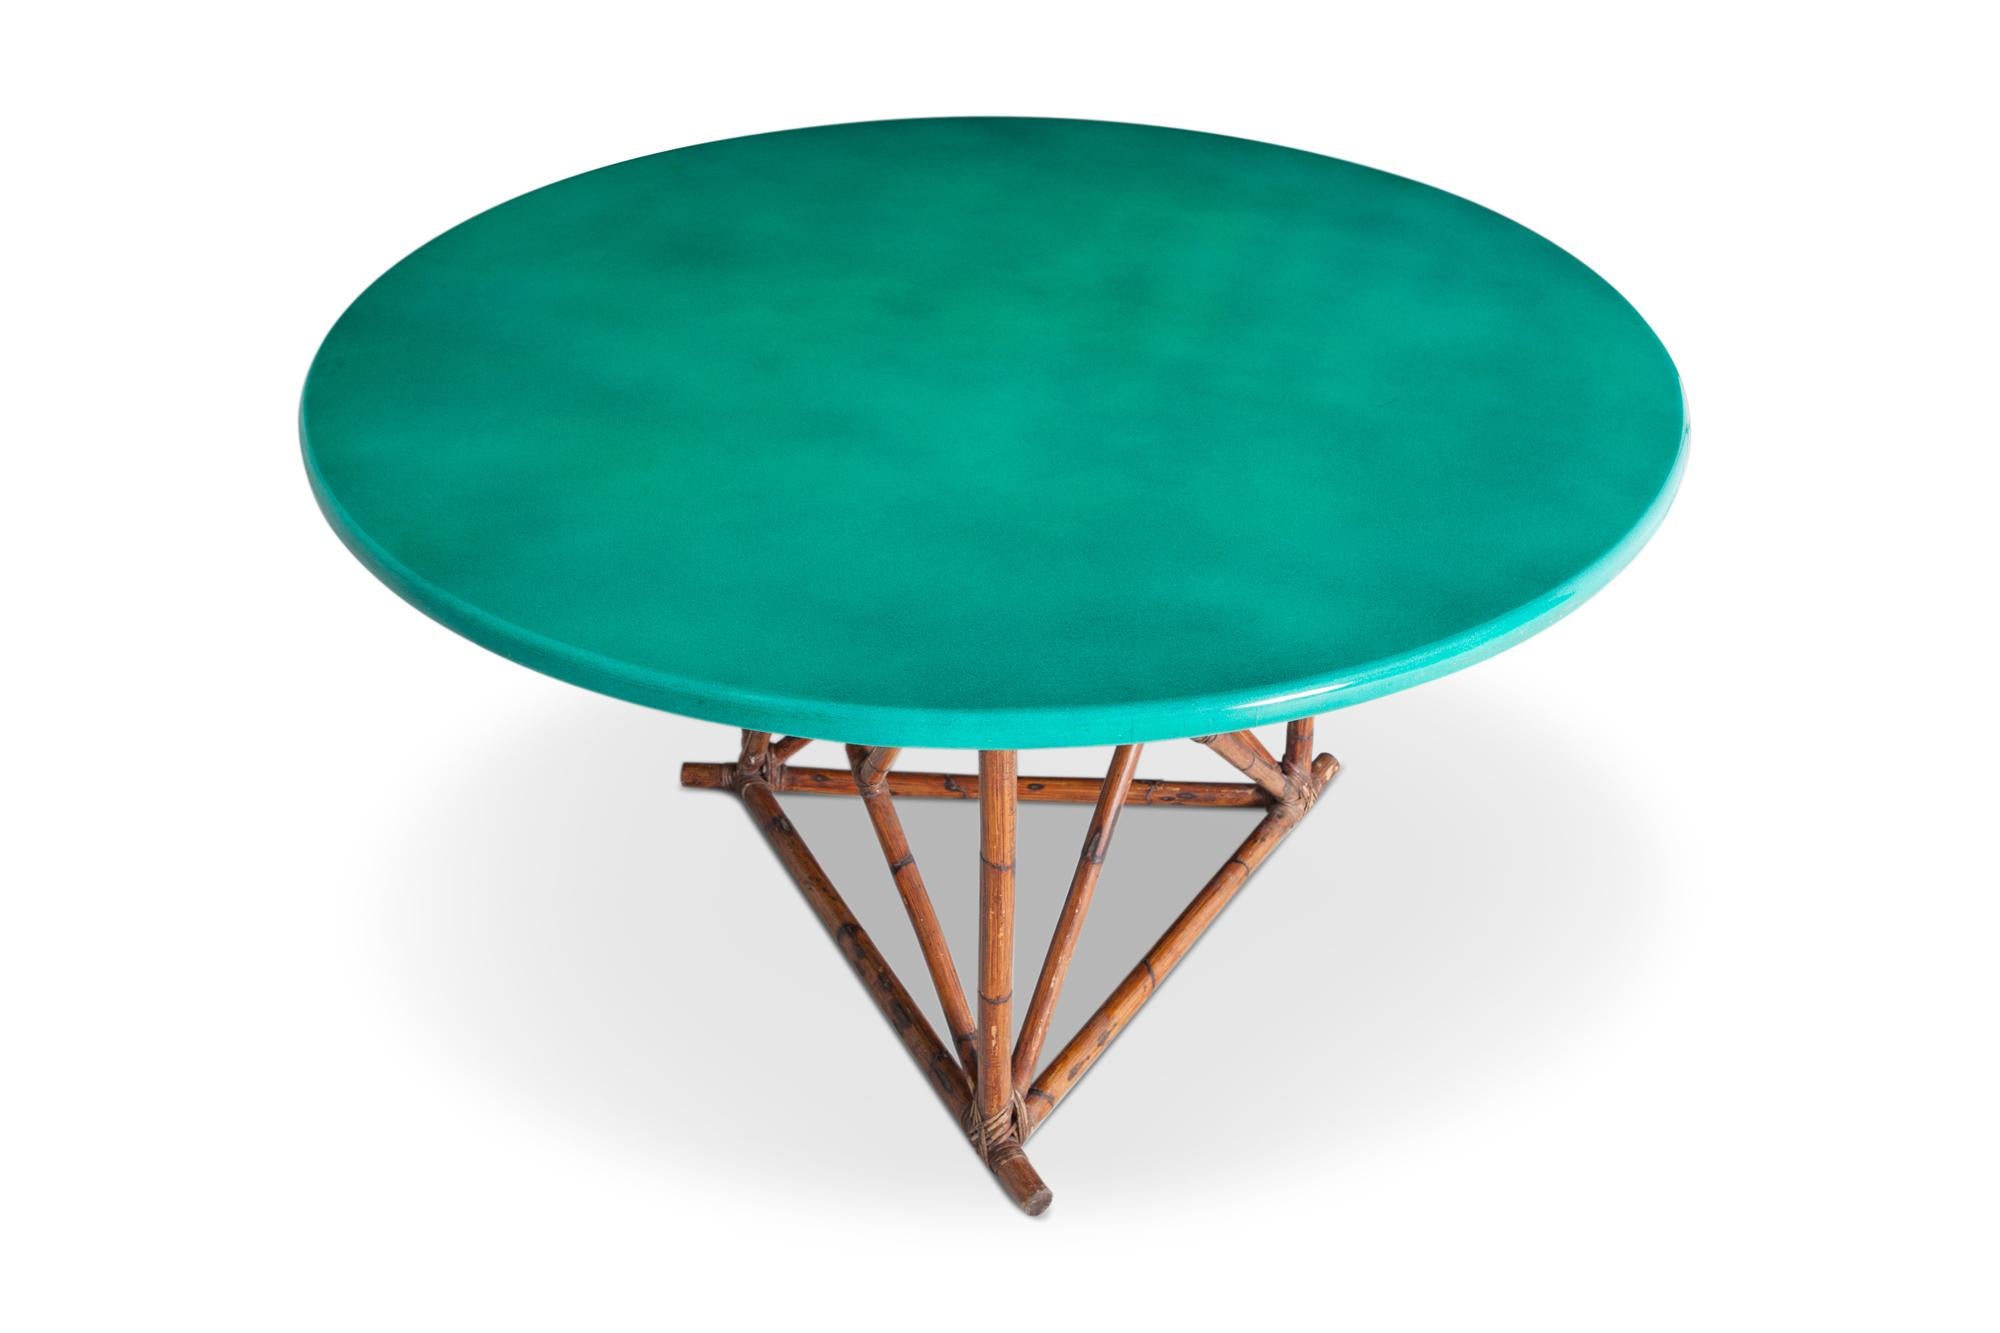 Lacquered chalk Italian dining table created for the famous Cassetti jewellery store in Florence, Italy. 

Truly a one-of-a-kind piece. The wonderful deep green lacquered top is supported by a lightweight bamboo frame. The richness of the green